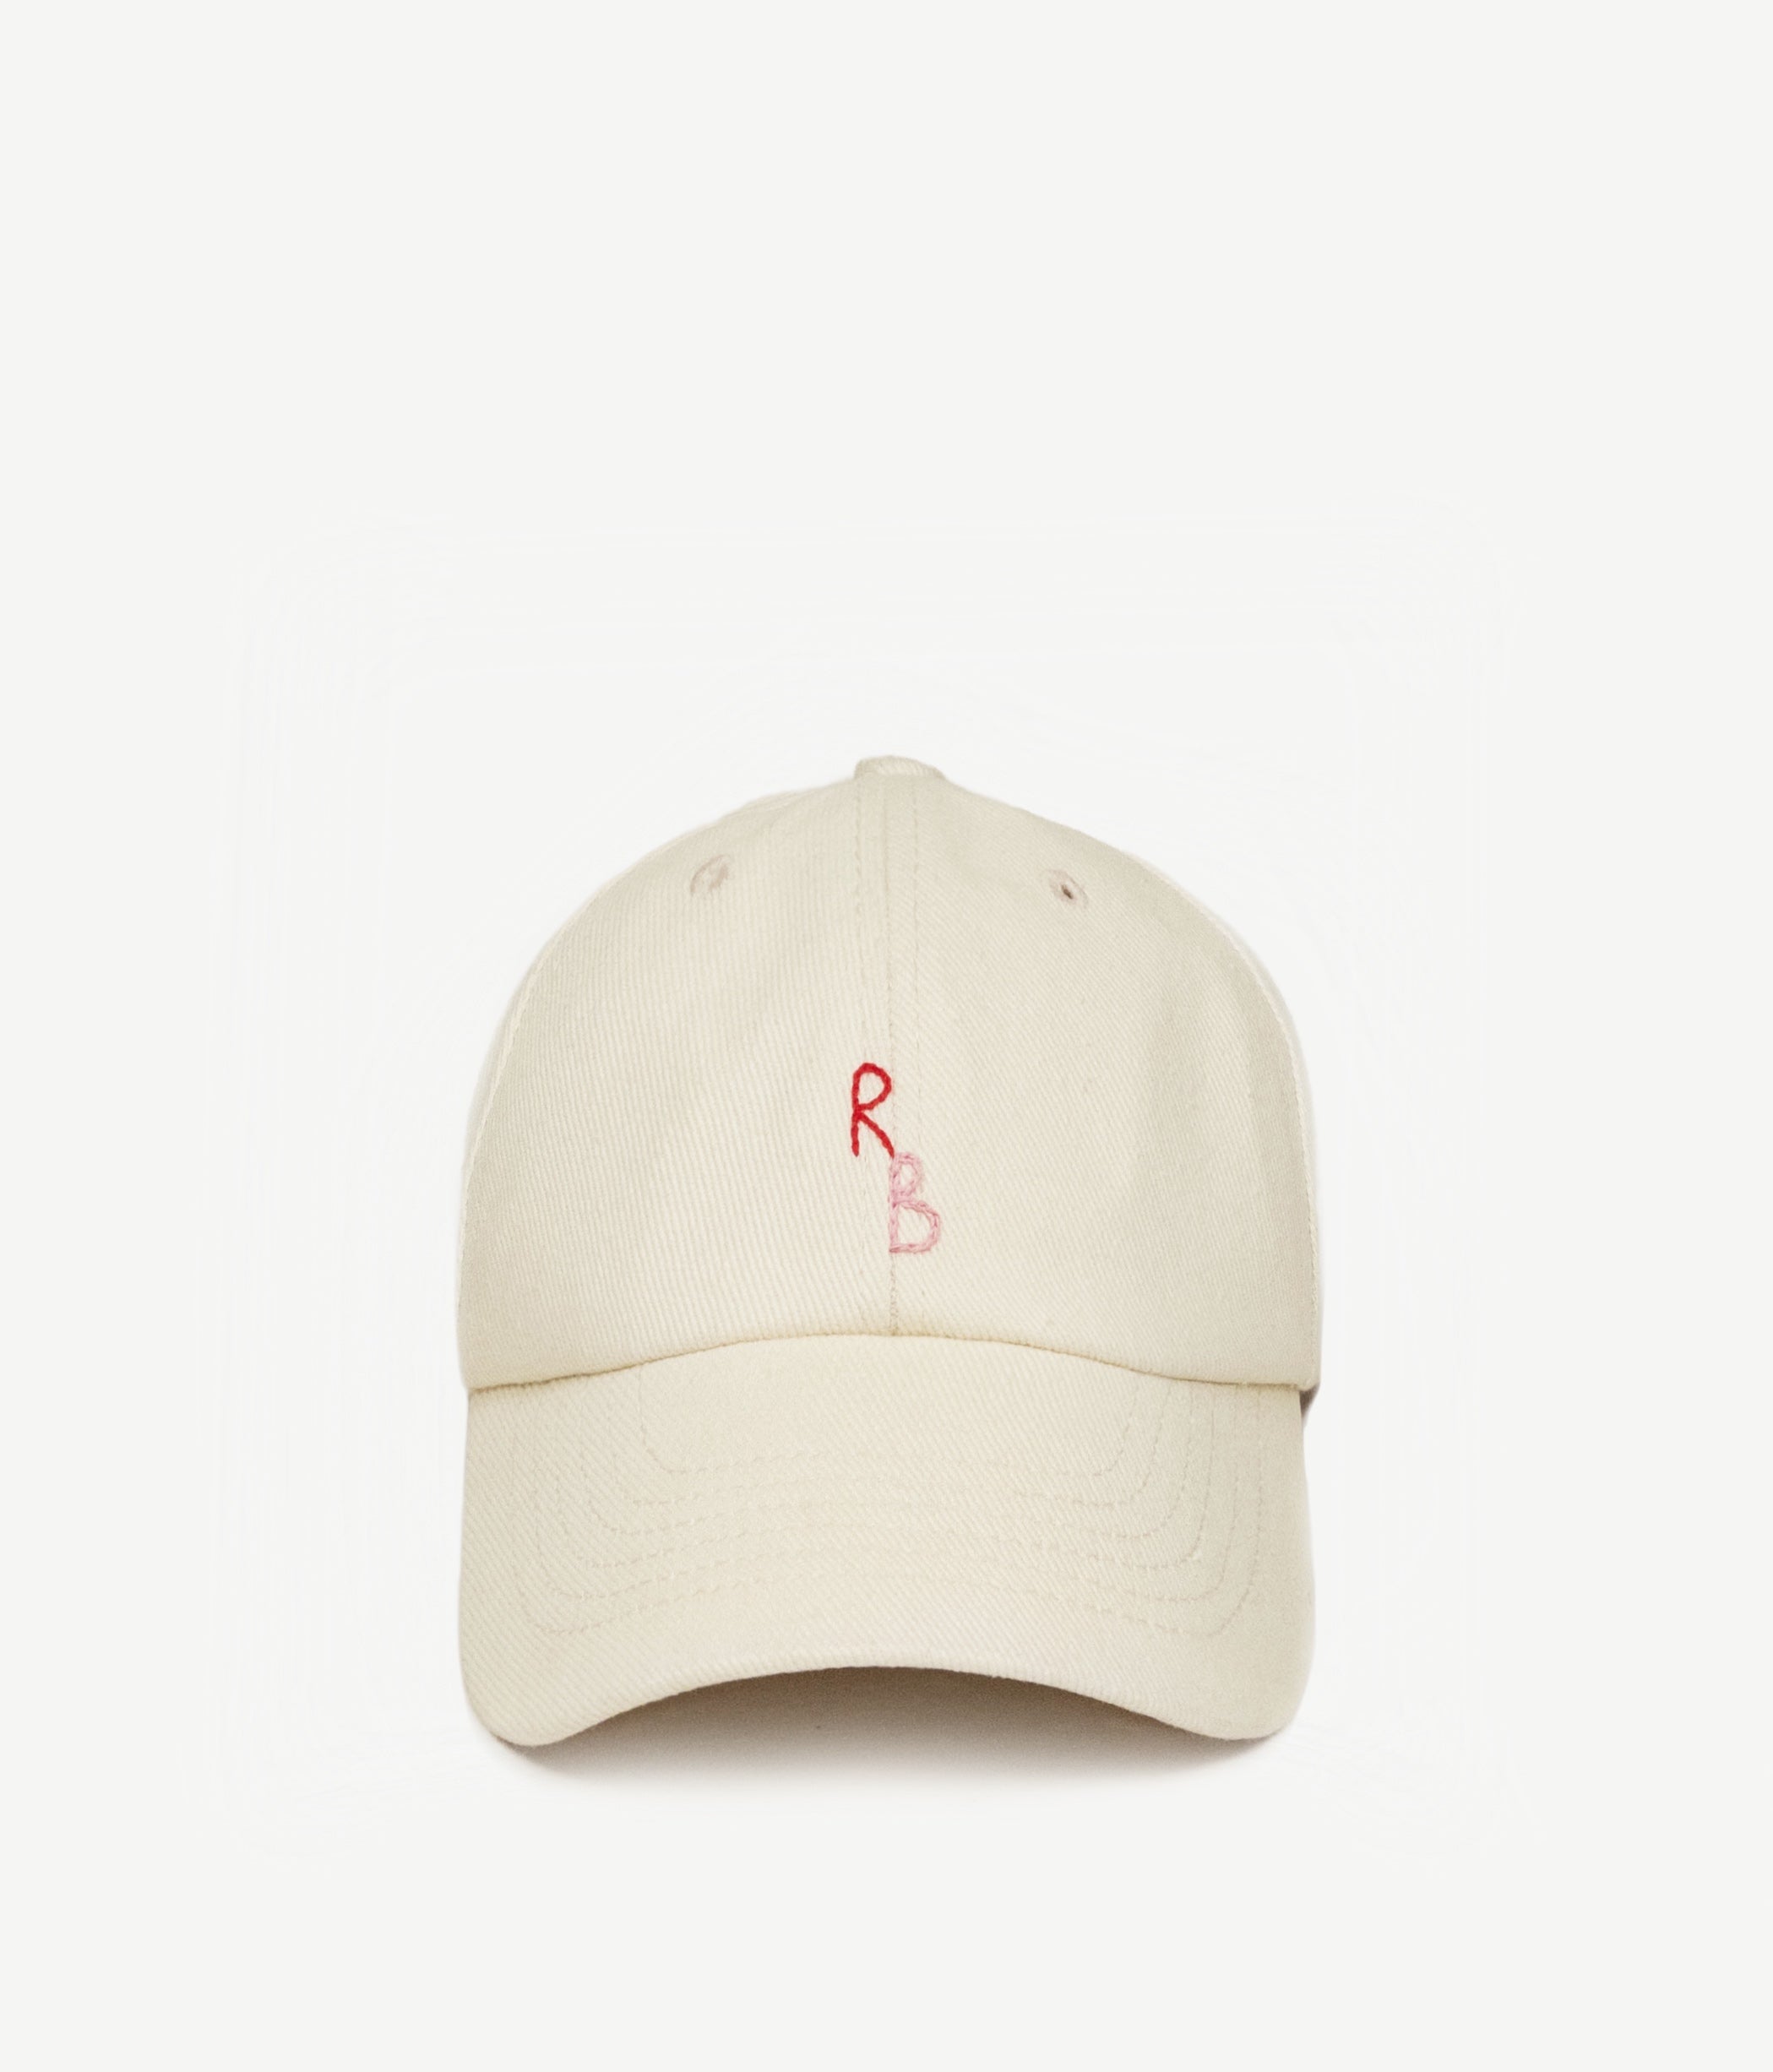 Cap for color Baseball with day RB A every